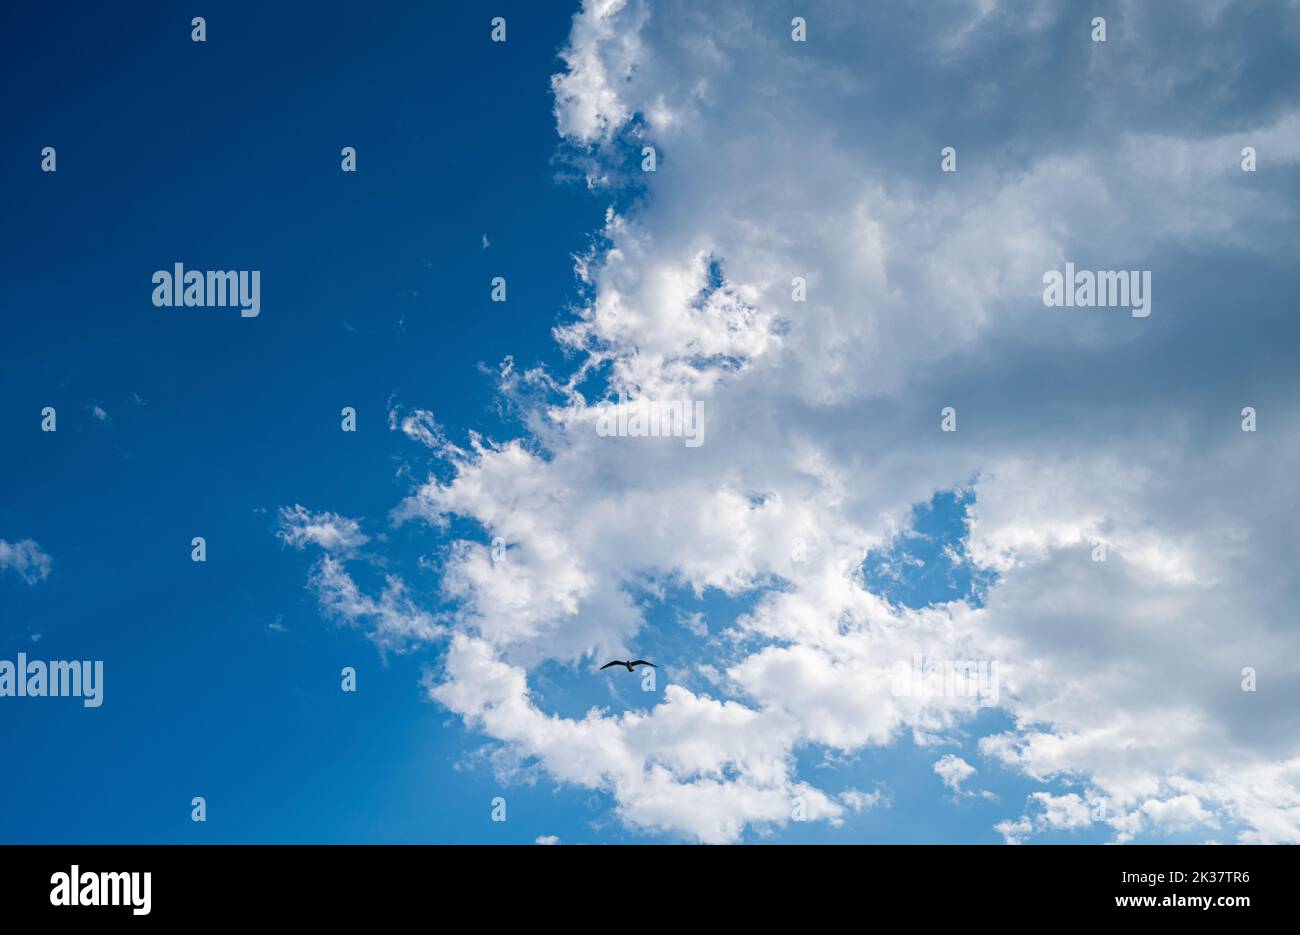 Dramatic blue sky with white clouds. Stock Photo